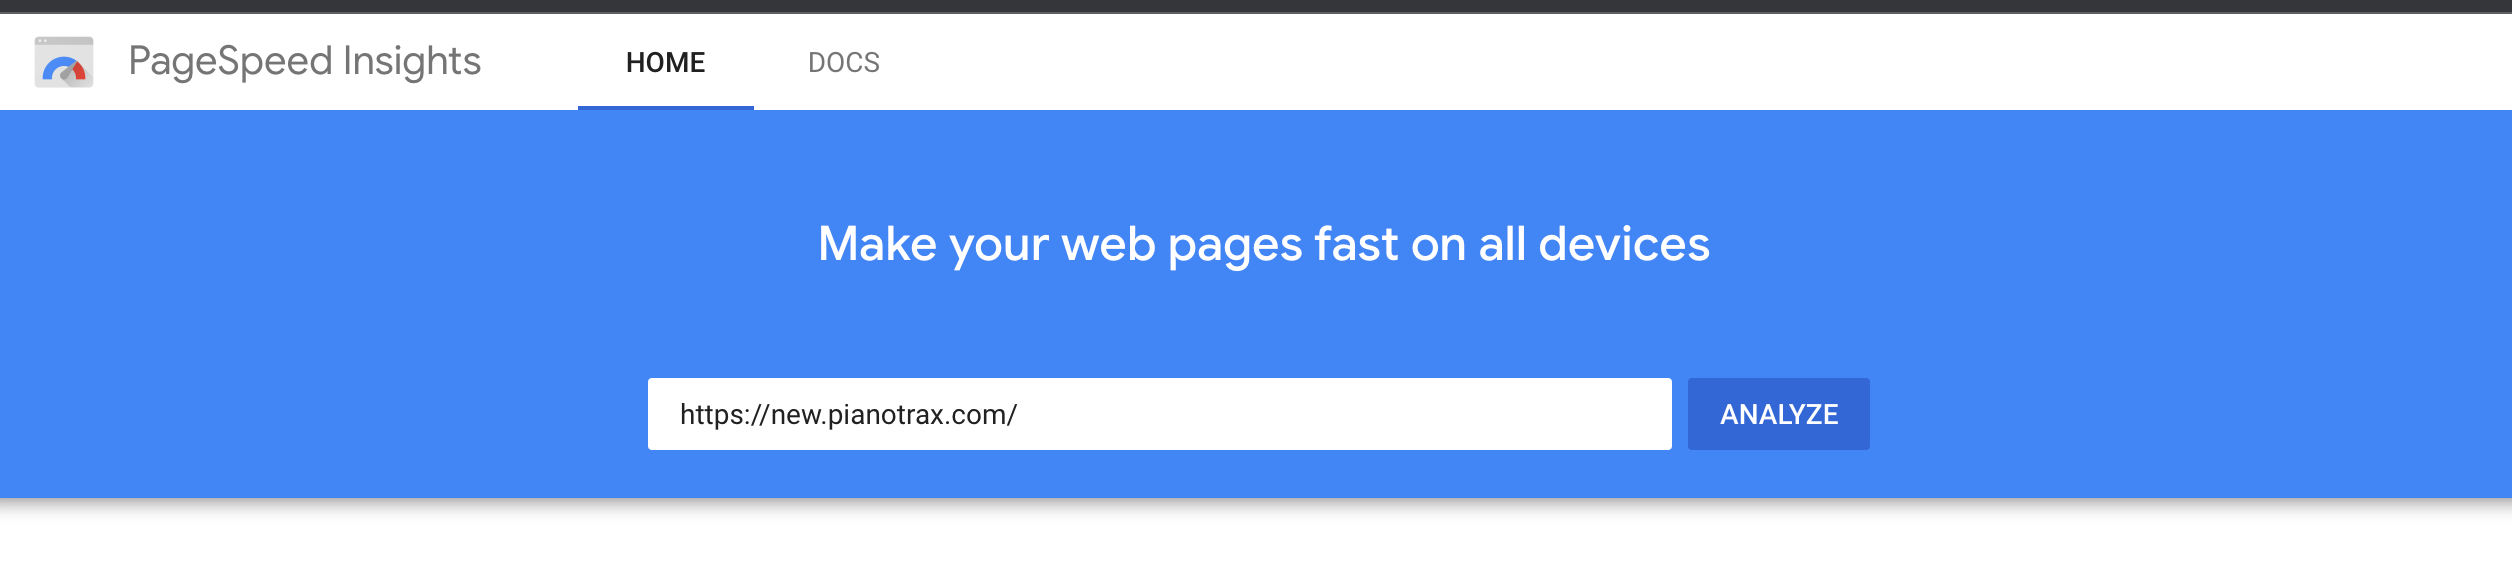 PageSpeed Home Page